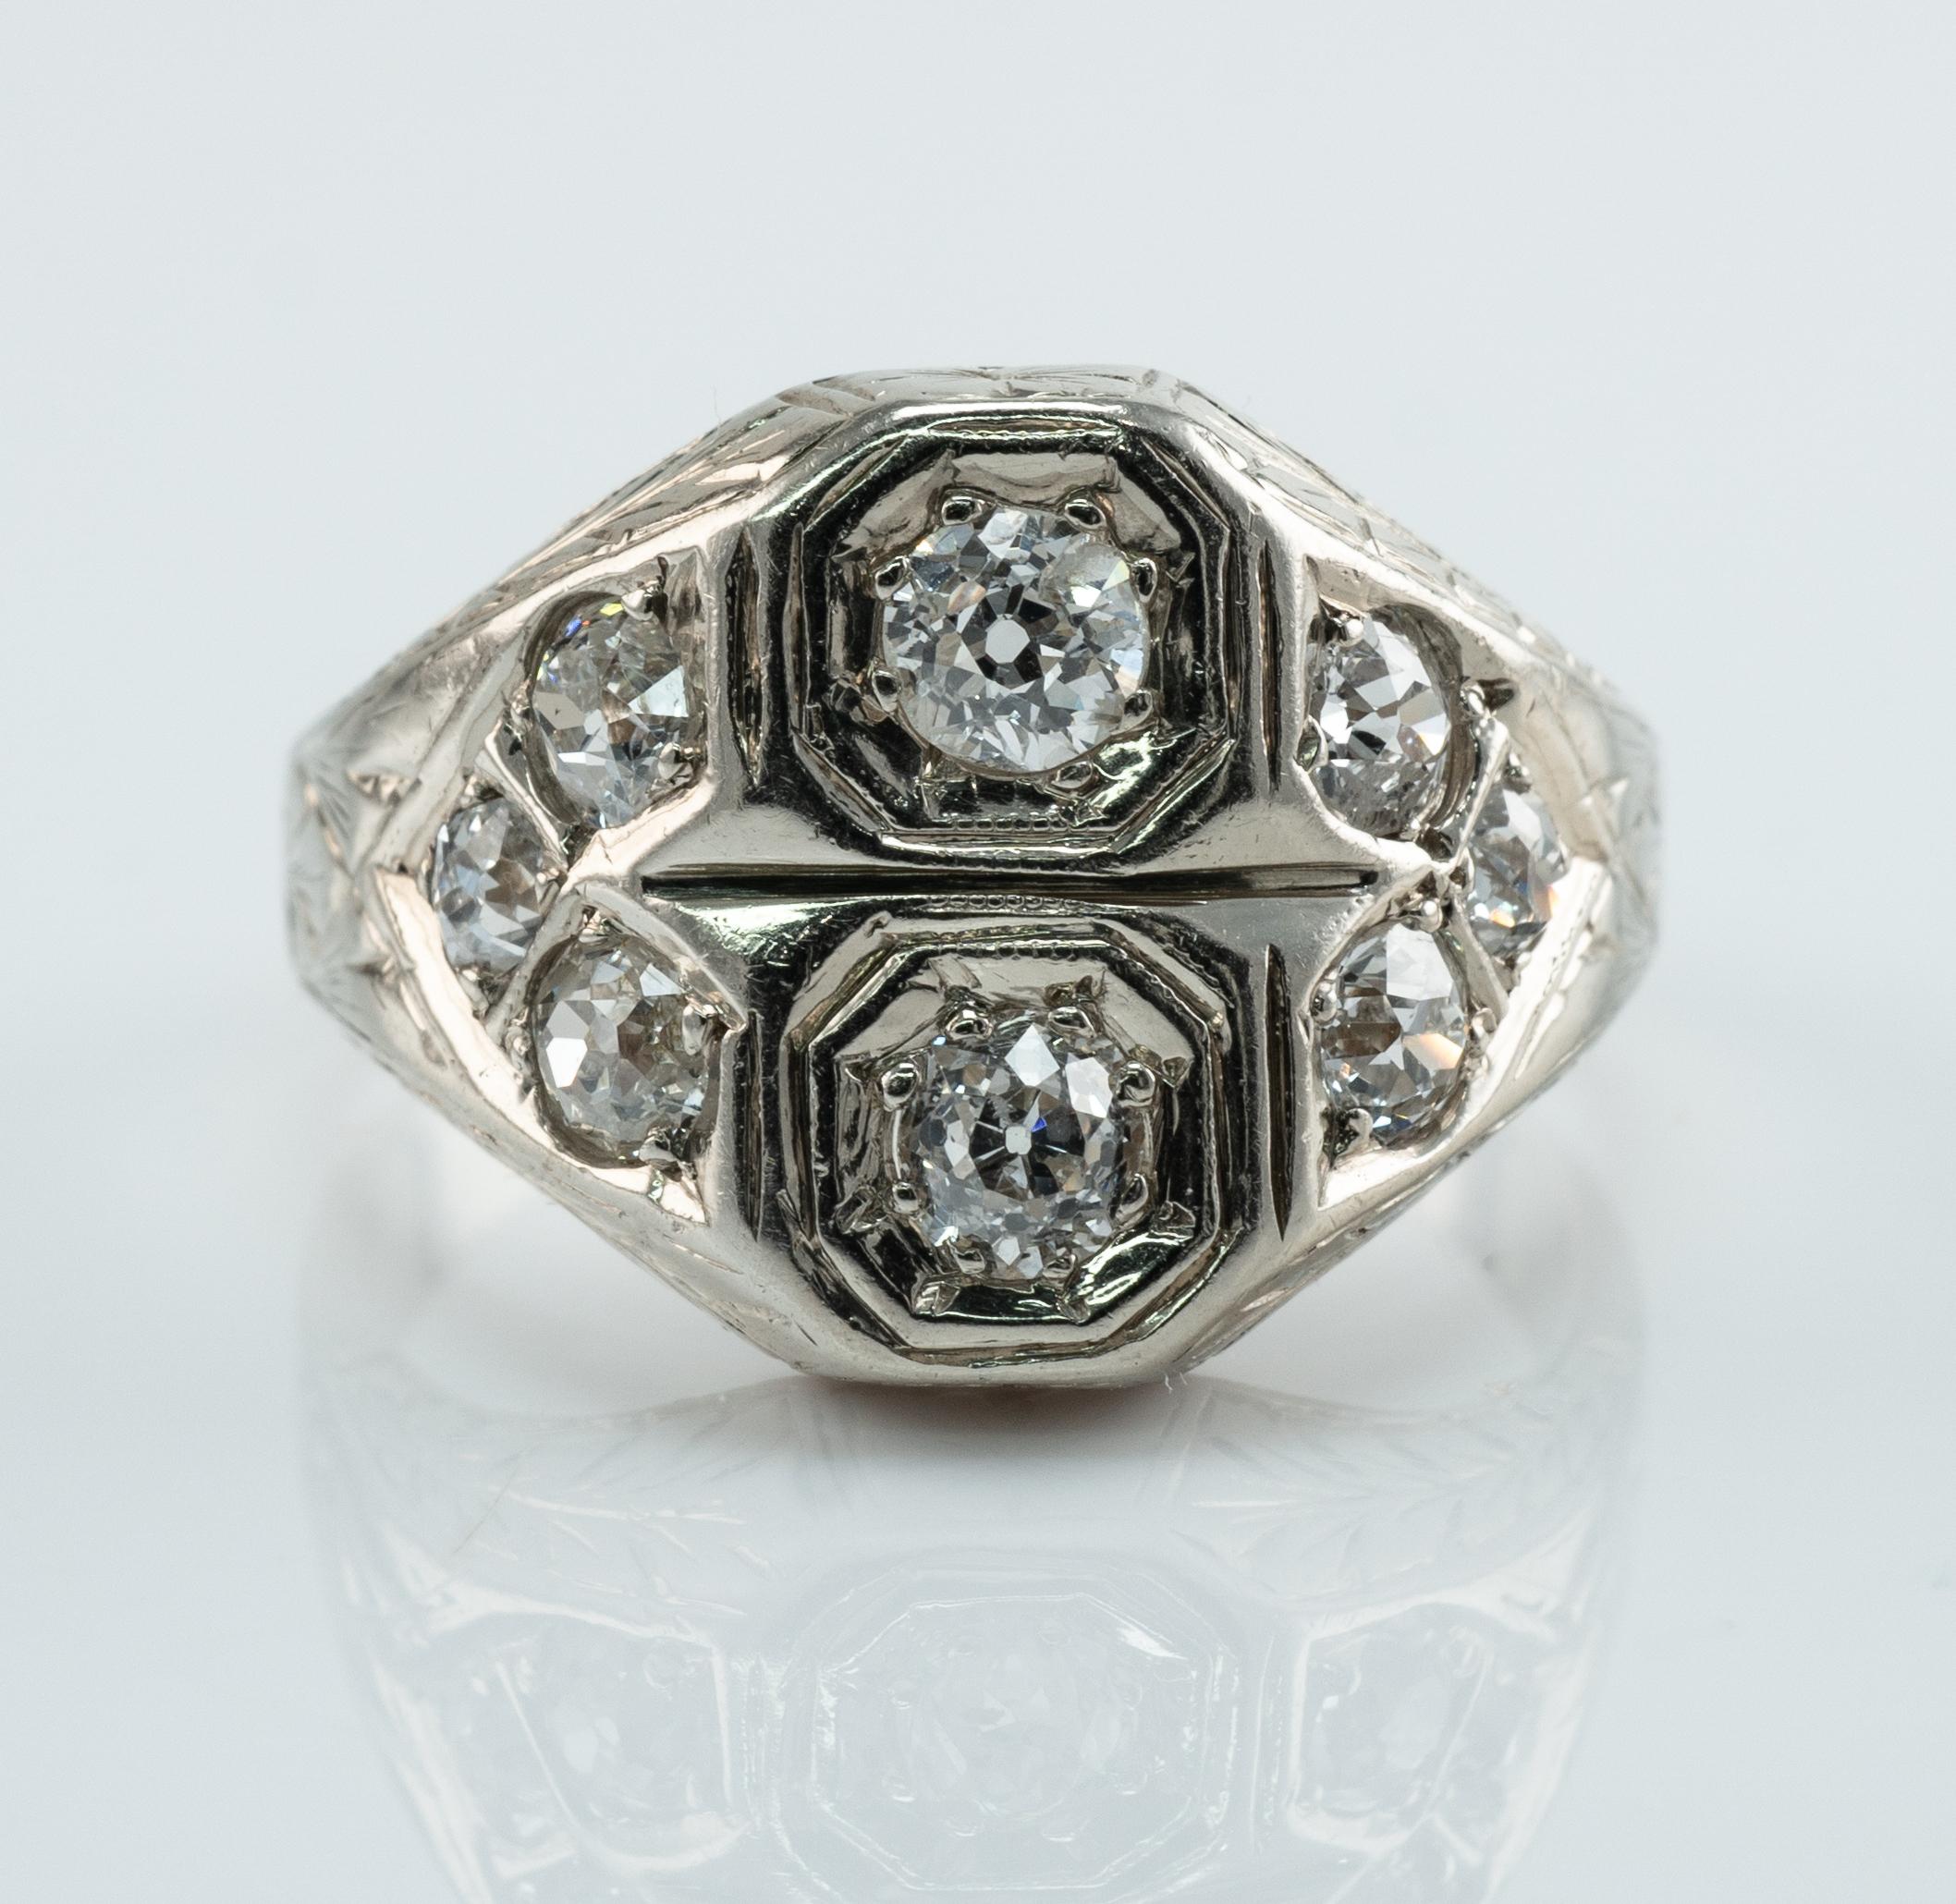 This vintage circa 1930s ring is crafted in solid 14K White Gold (carefully tested and guaranteed). 
Two center old mine cut diamonds are .20ct and .18ct.
Six side diamonds are 0.08ct (4 gems) and 0.06ct (2 gems) = .44 carats.
The total diamond